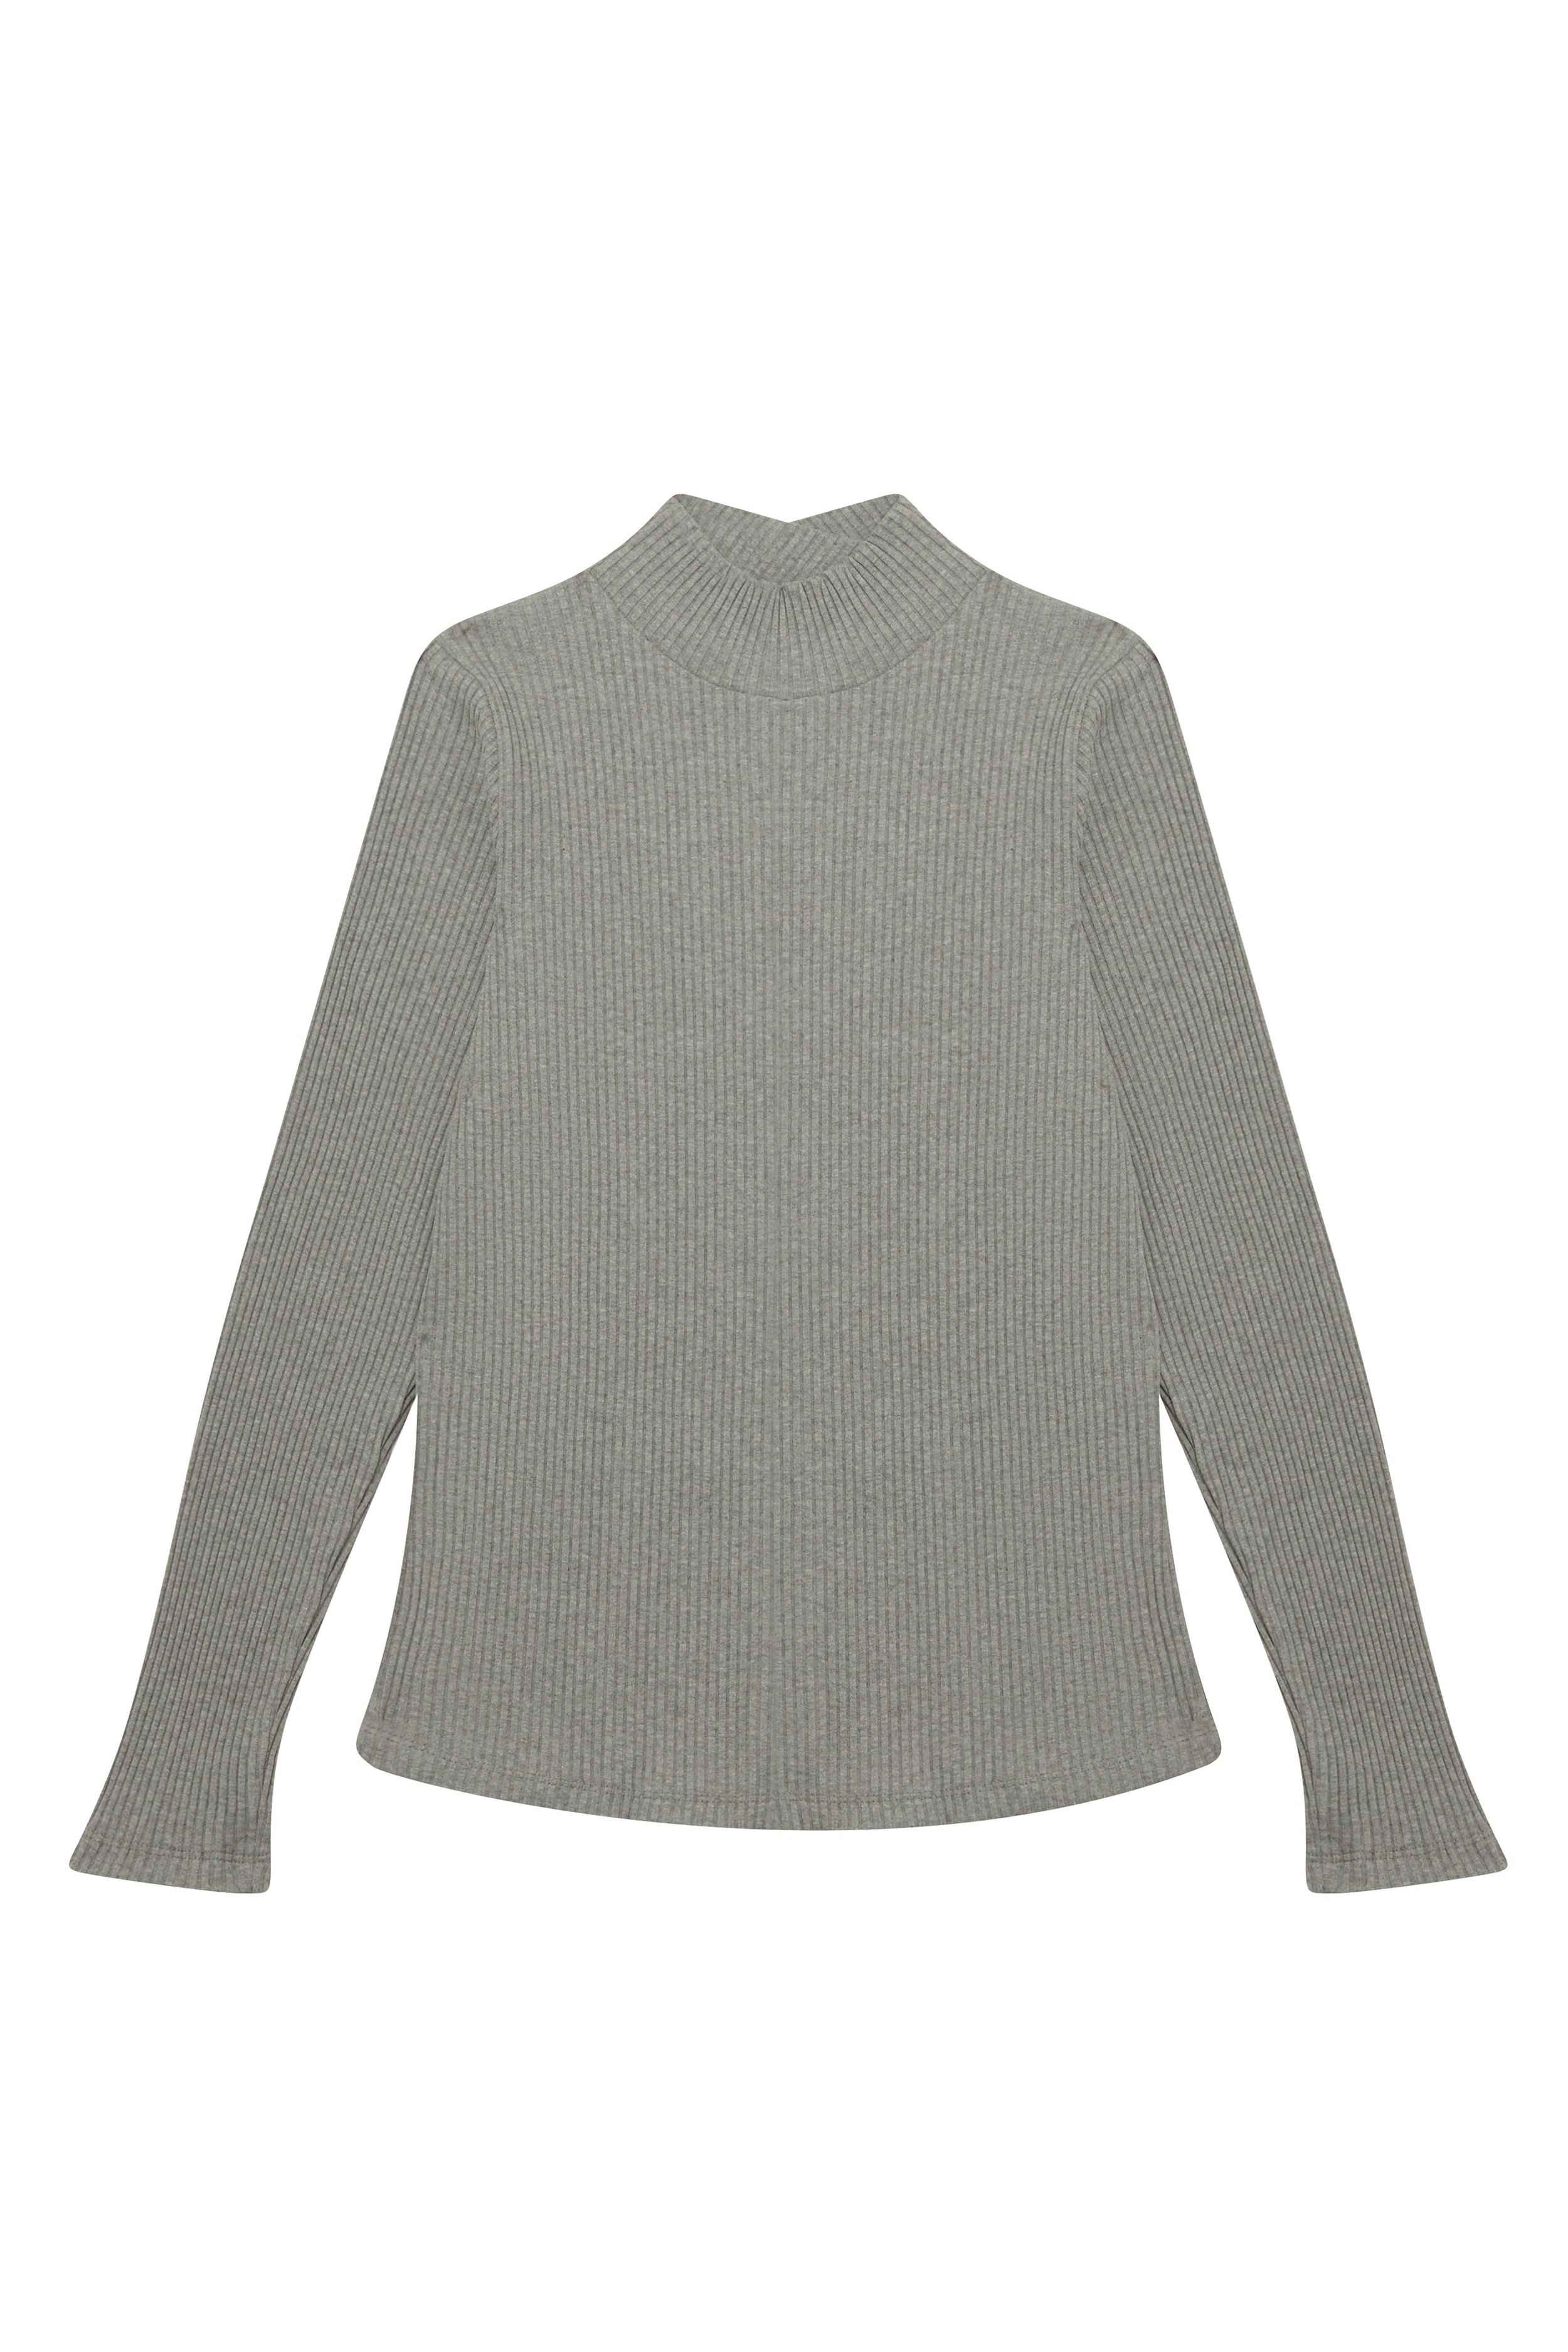 Le Douglas - The Must-Have Rib-Knitted Top With a Feminine Twist ...